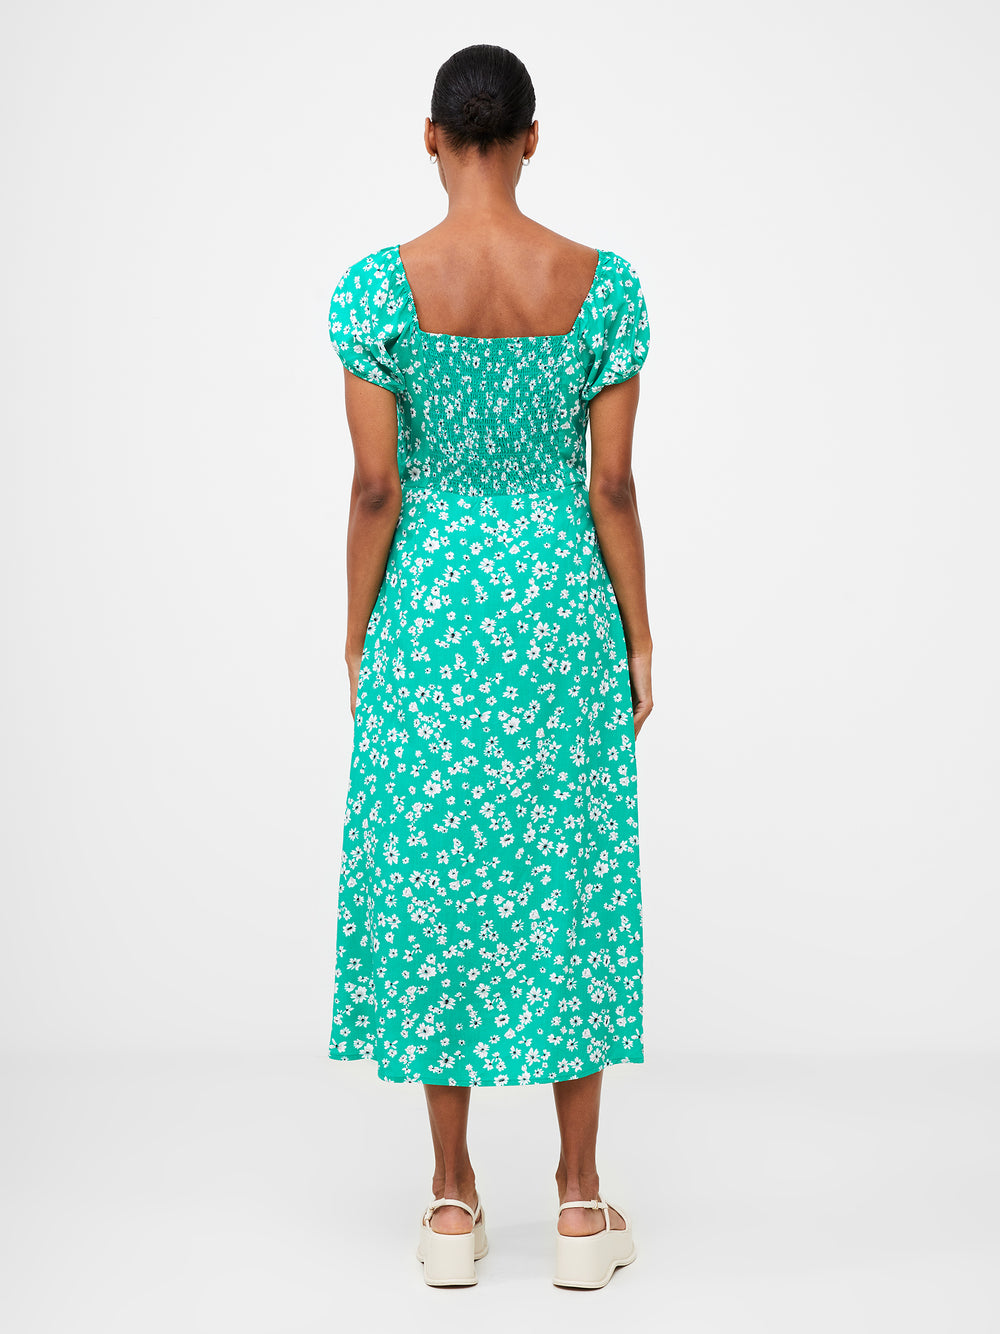 Sweetheart Empire Midi Dress Veridian Green | French Connection UK